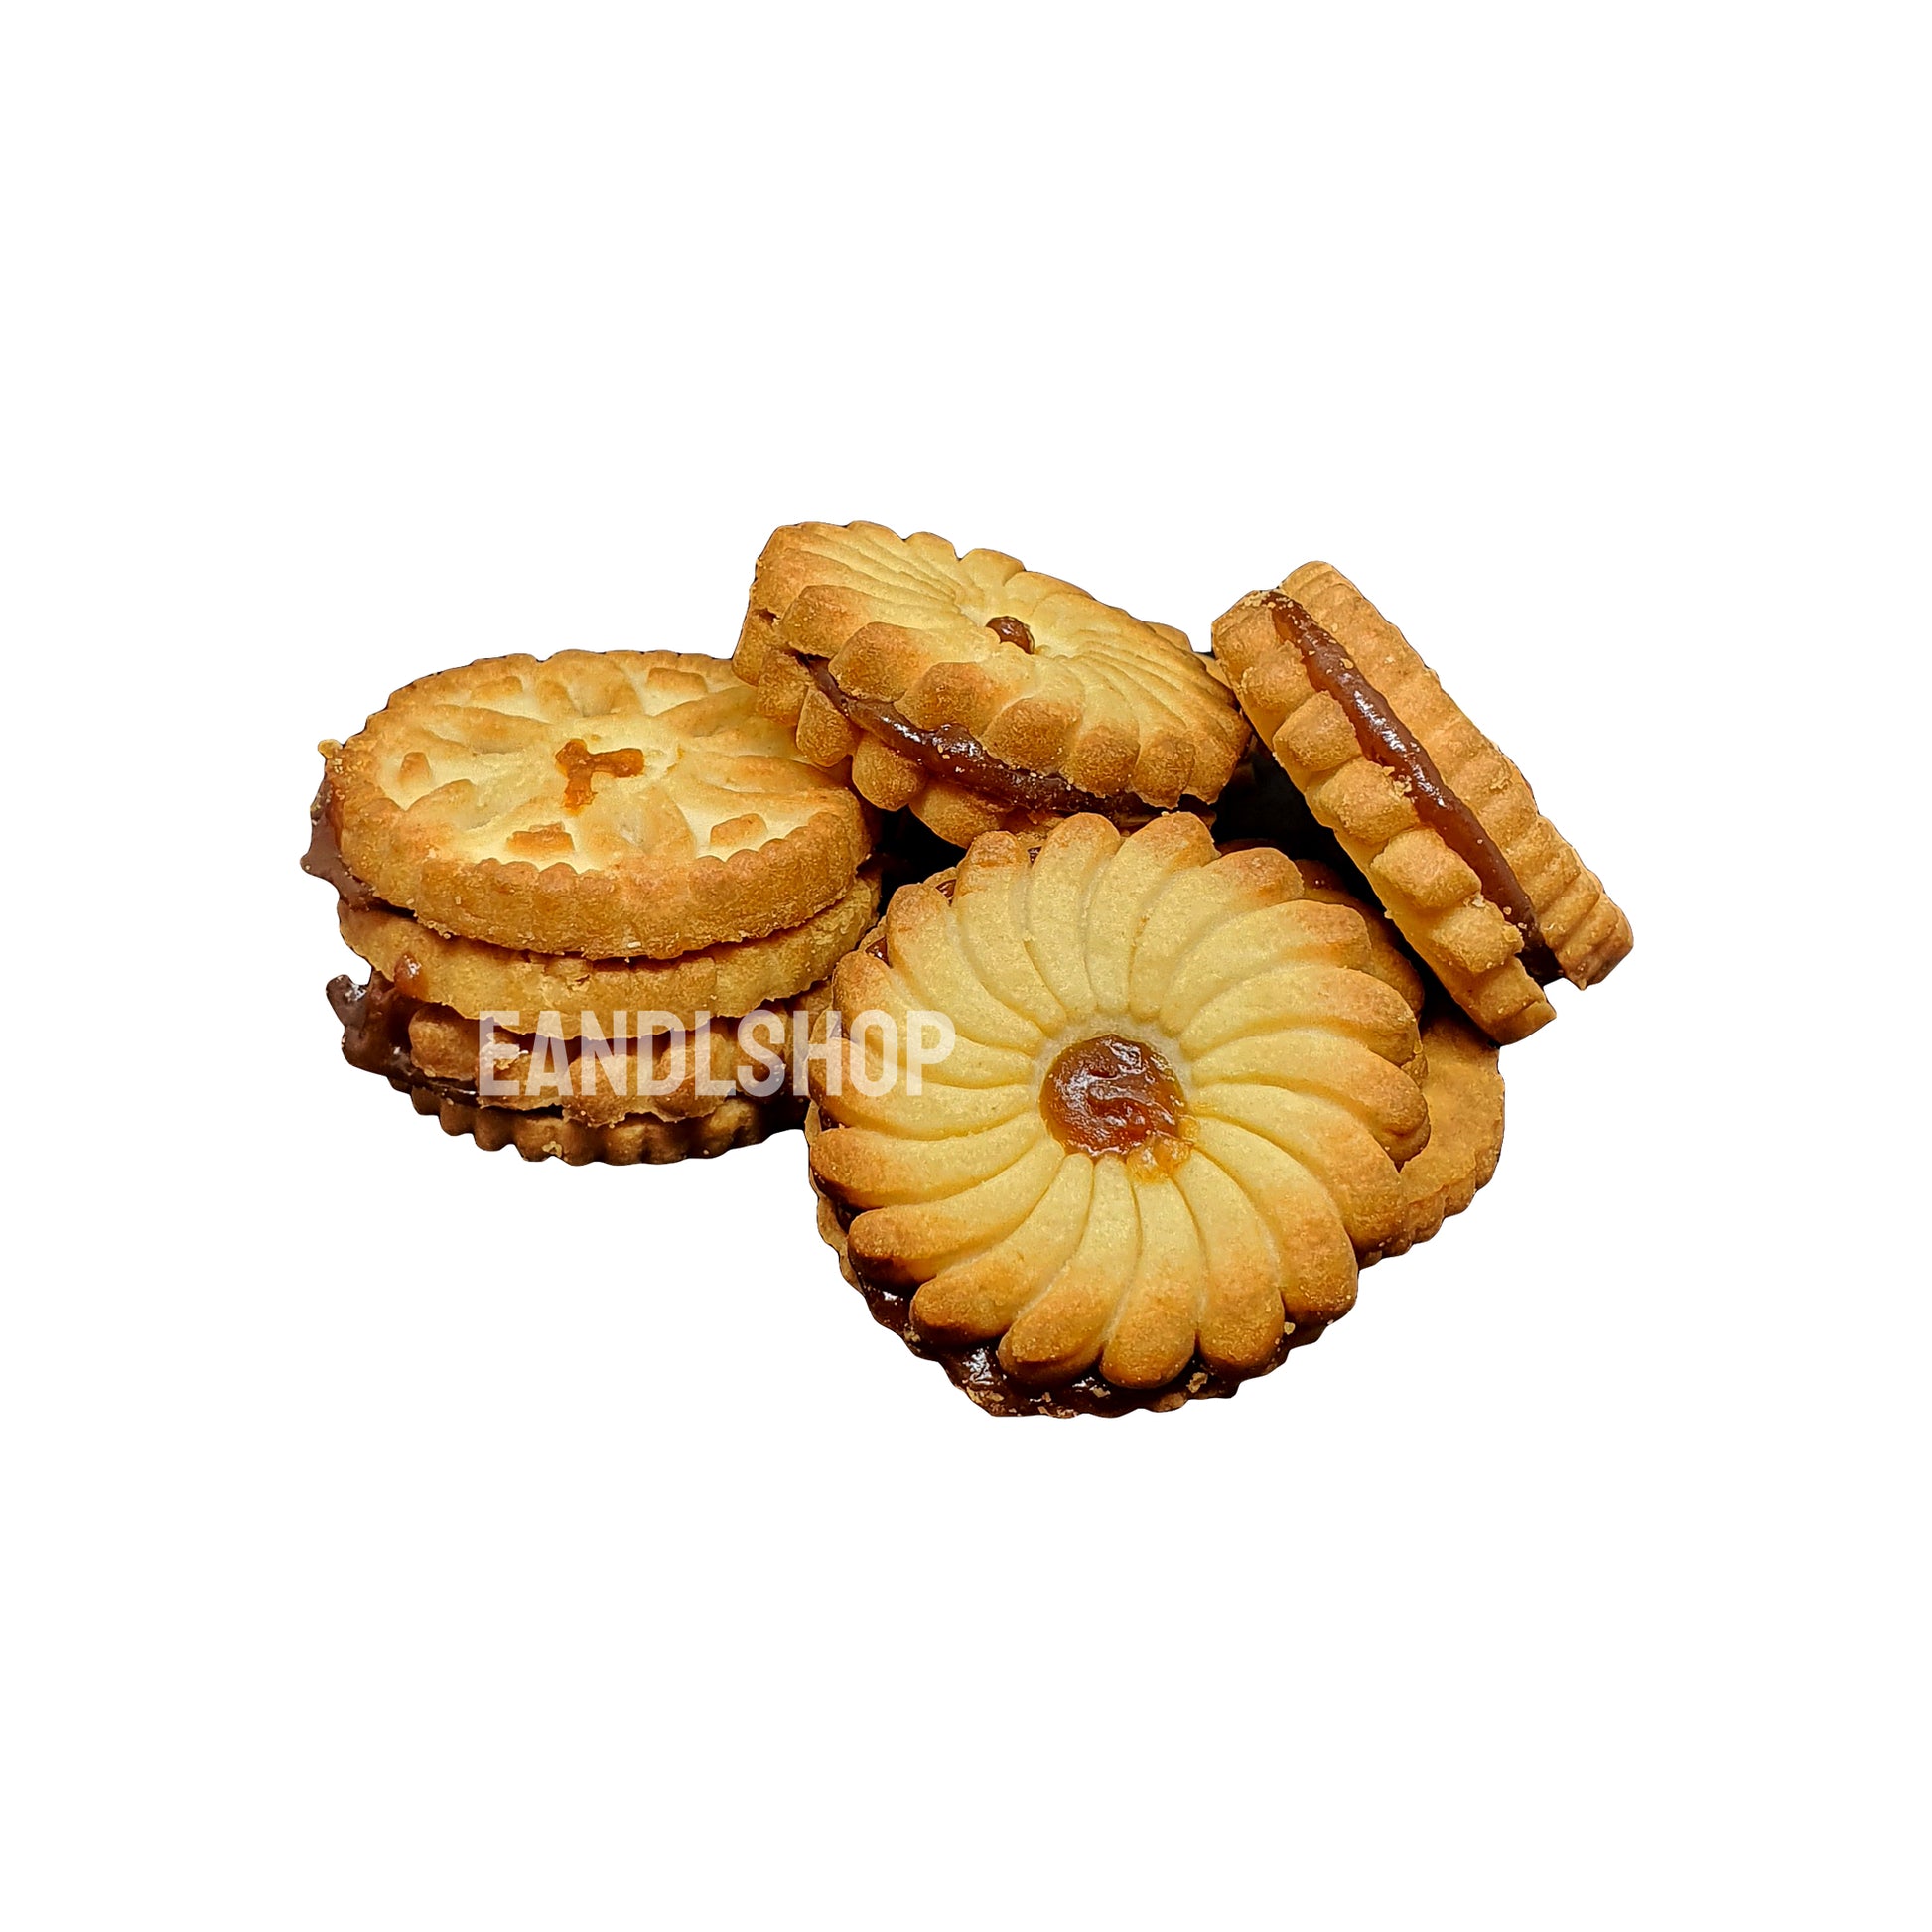 Pineapple Jam biscuits. Old-school biscuits, modern snacks (chips, crackers), cakes, gummies, plums, dried fruits, nuts, herbal tea – available at www.EANDLSHOP.com